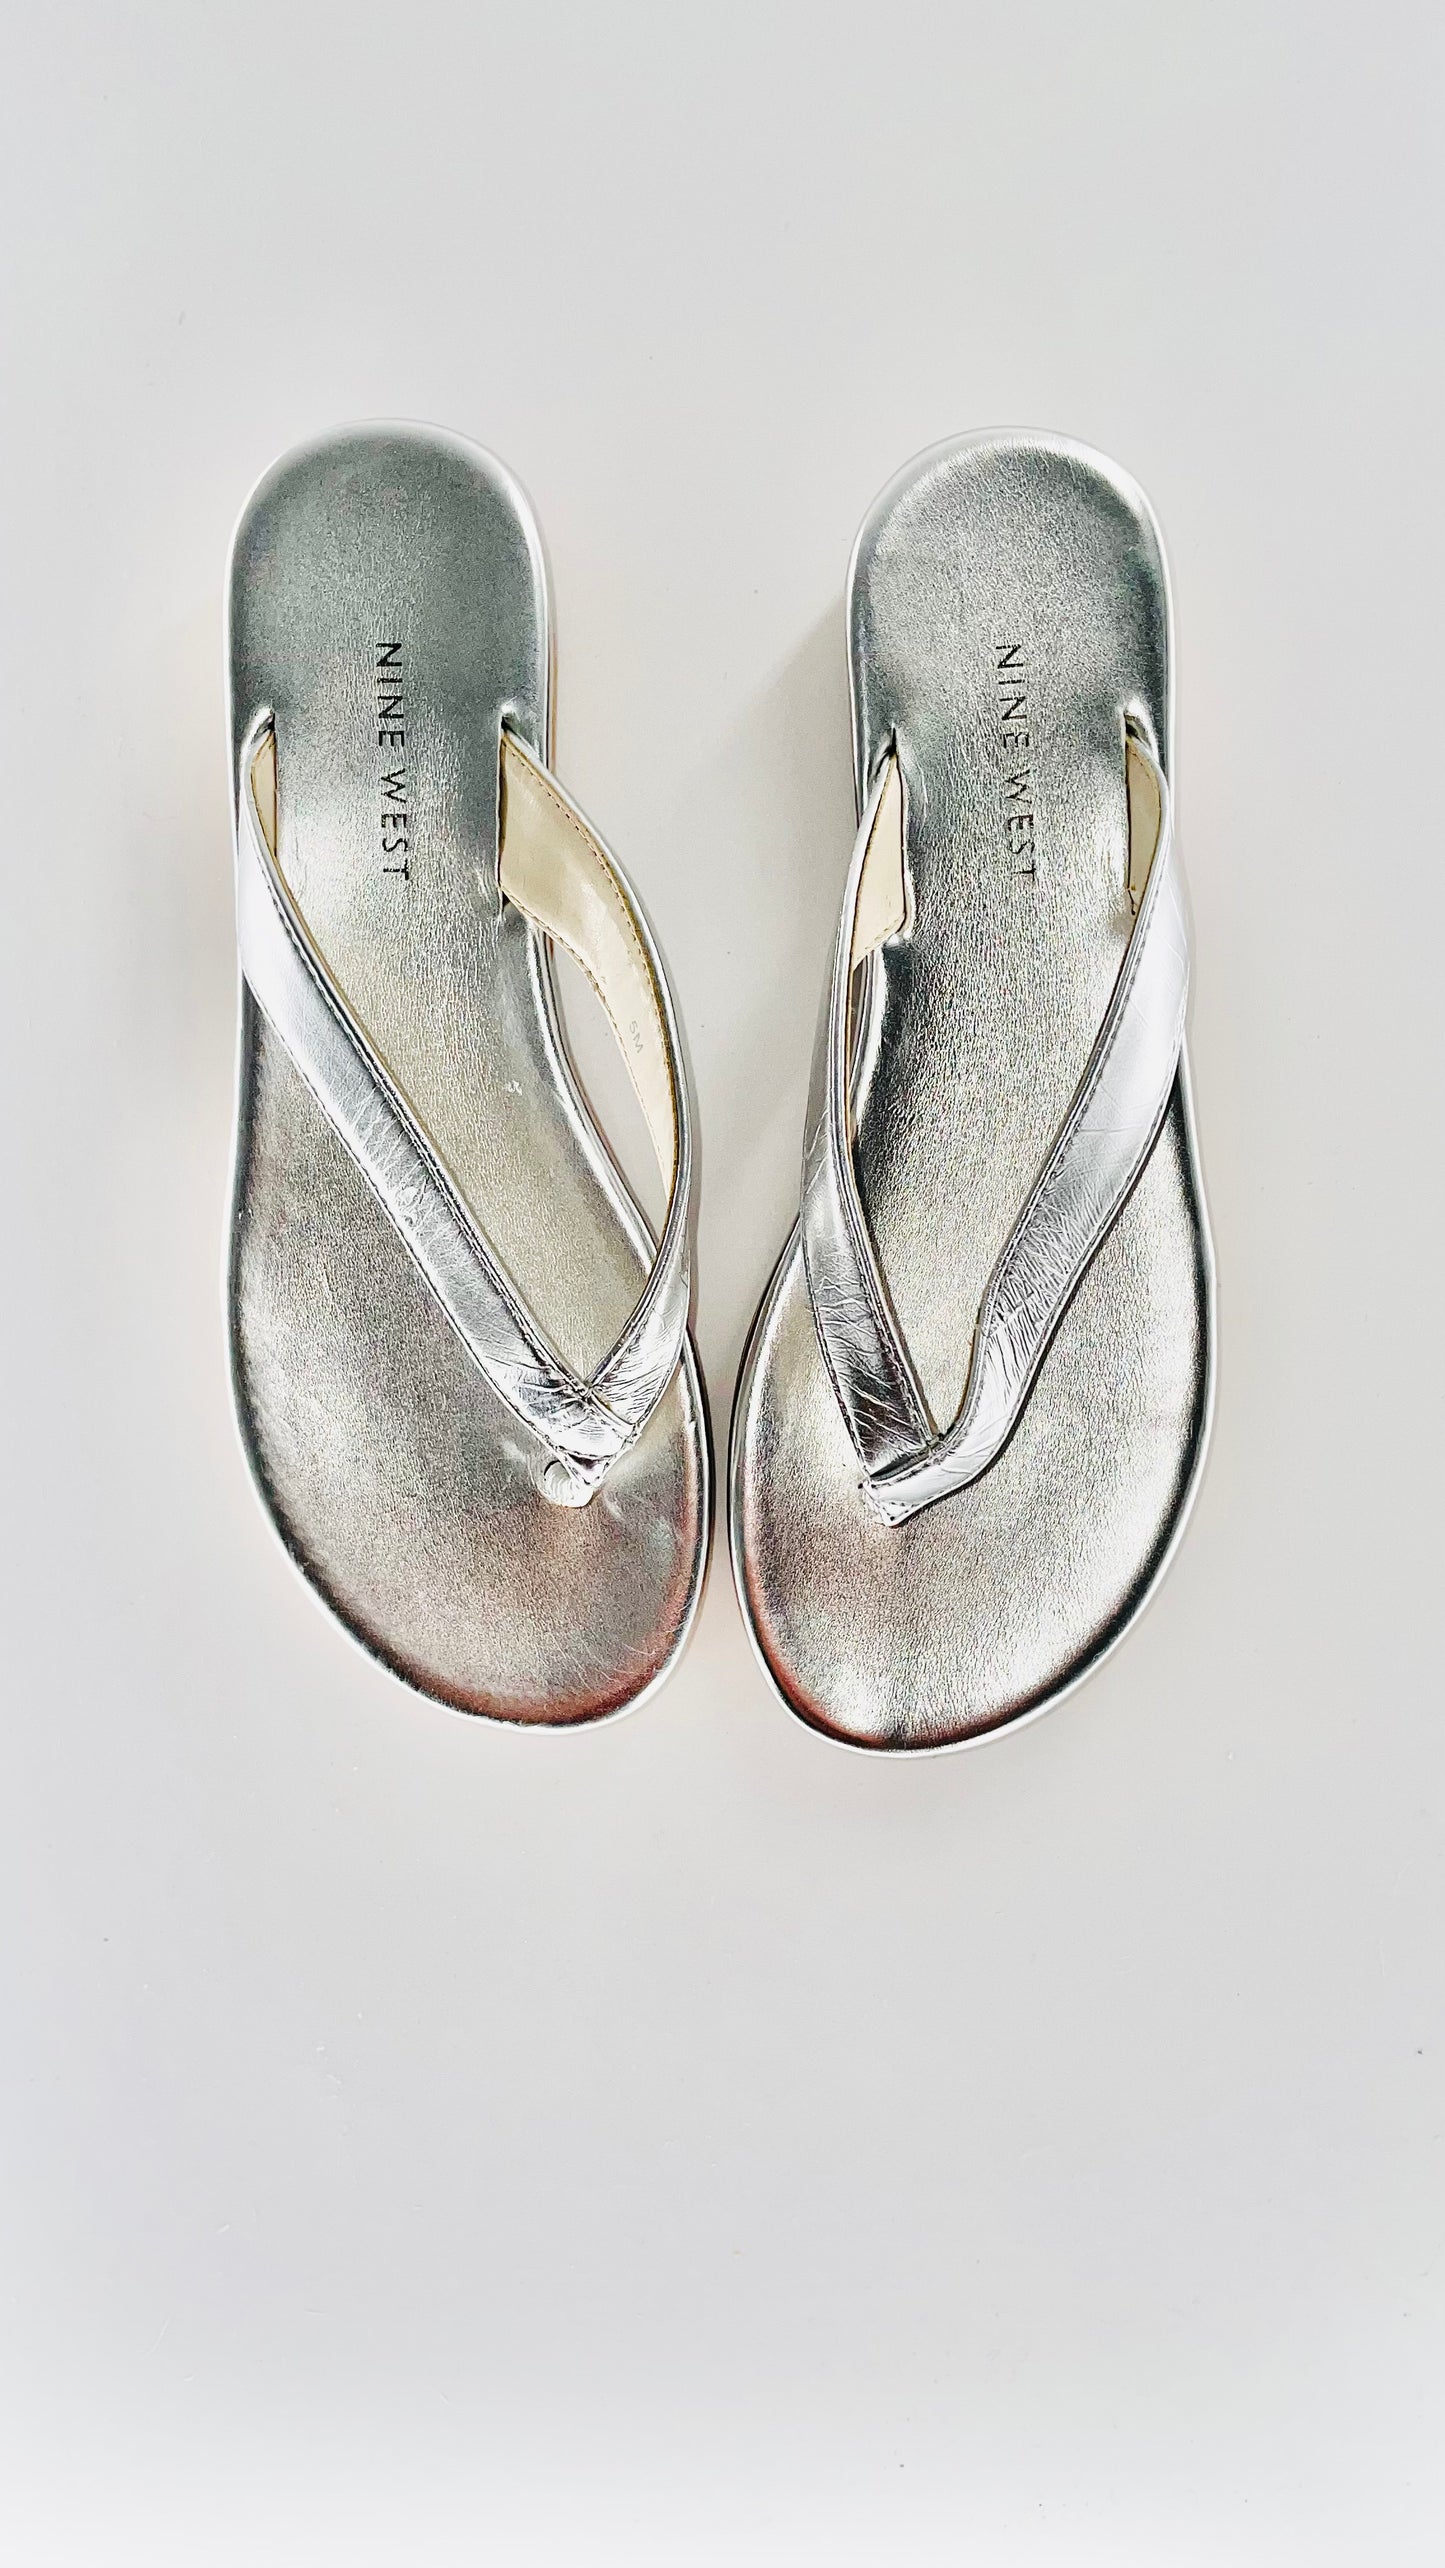 Pre-Loved silver Nine West faux leather thong sandals - Size 5